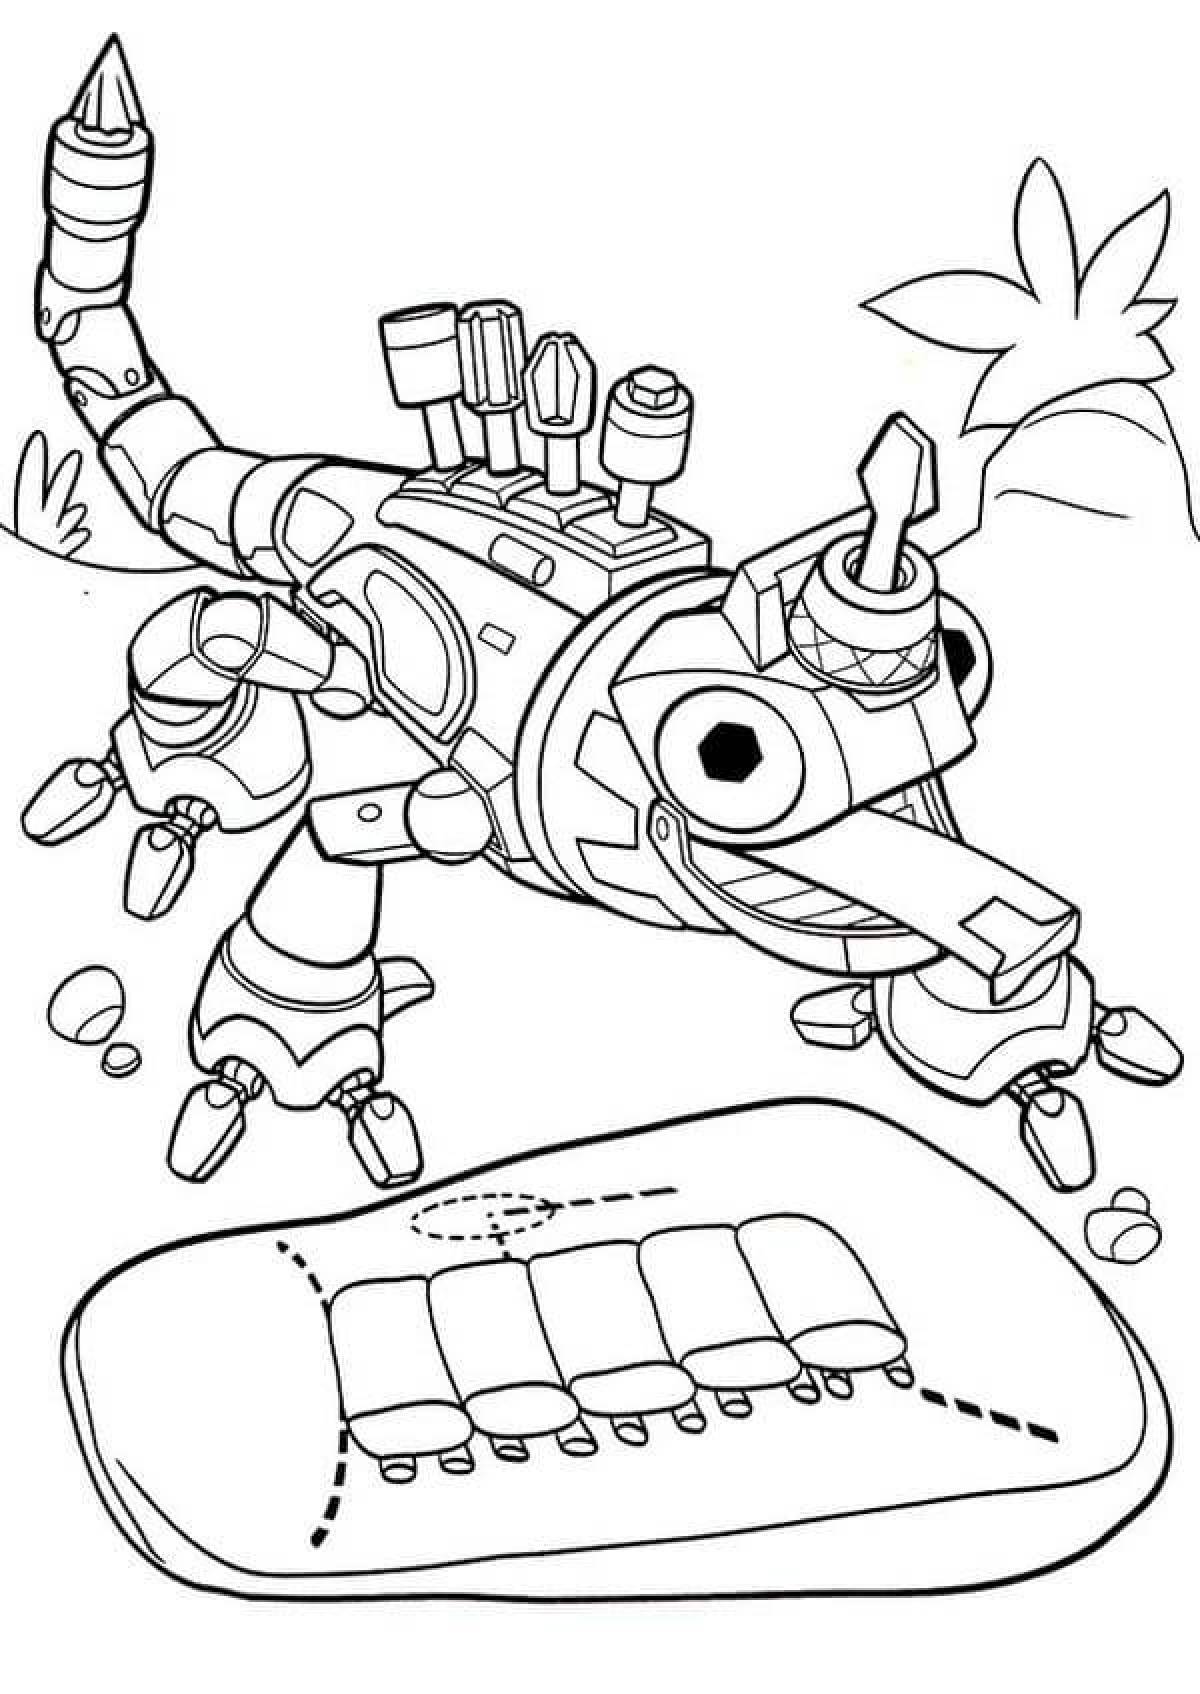 Charming dino team coloring book